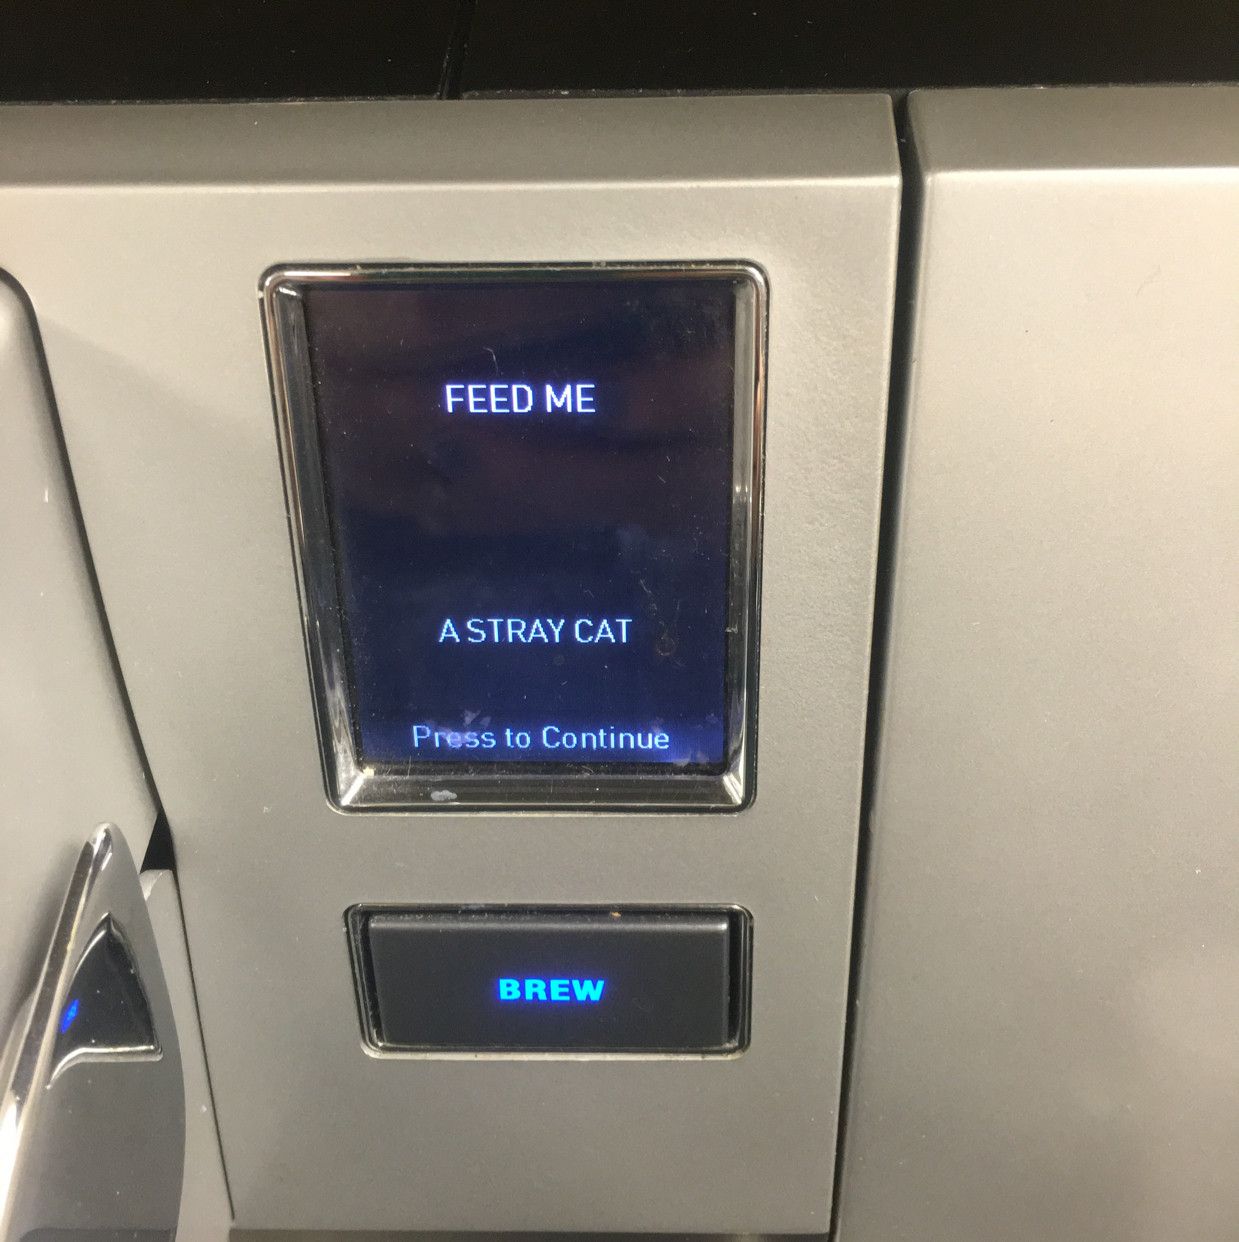 The office Keurig might be possessed.